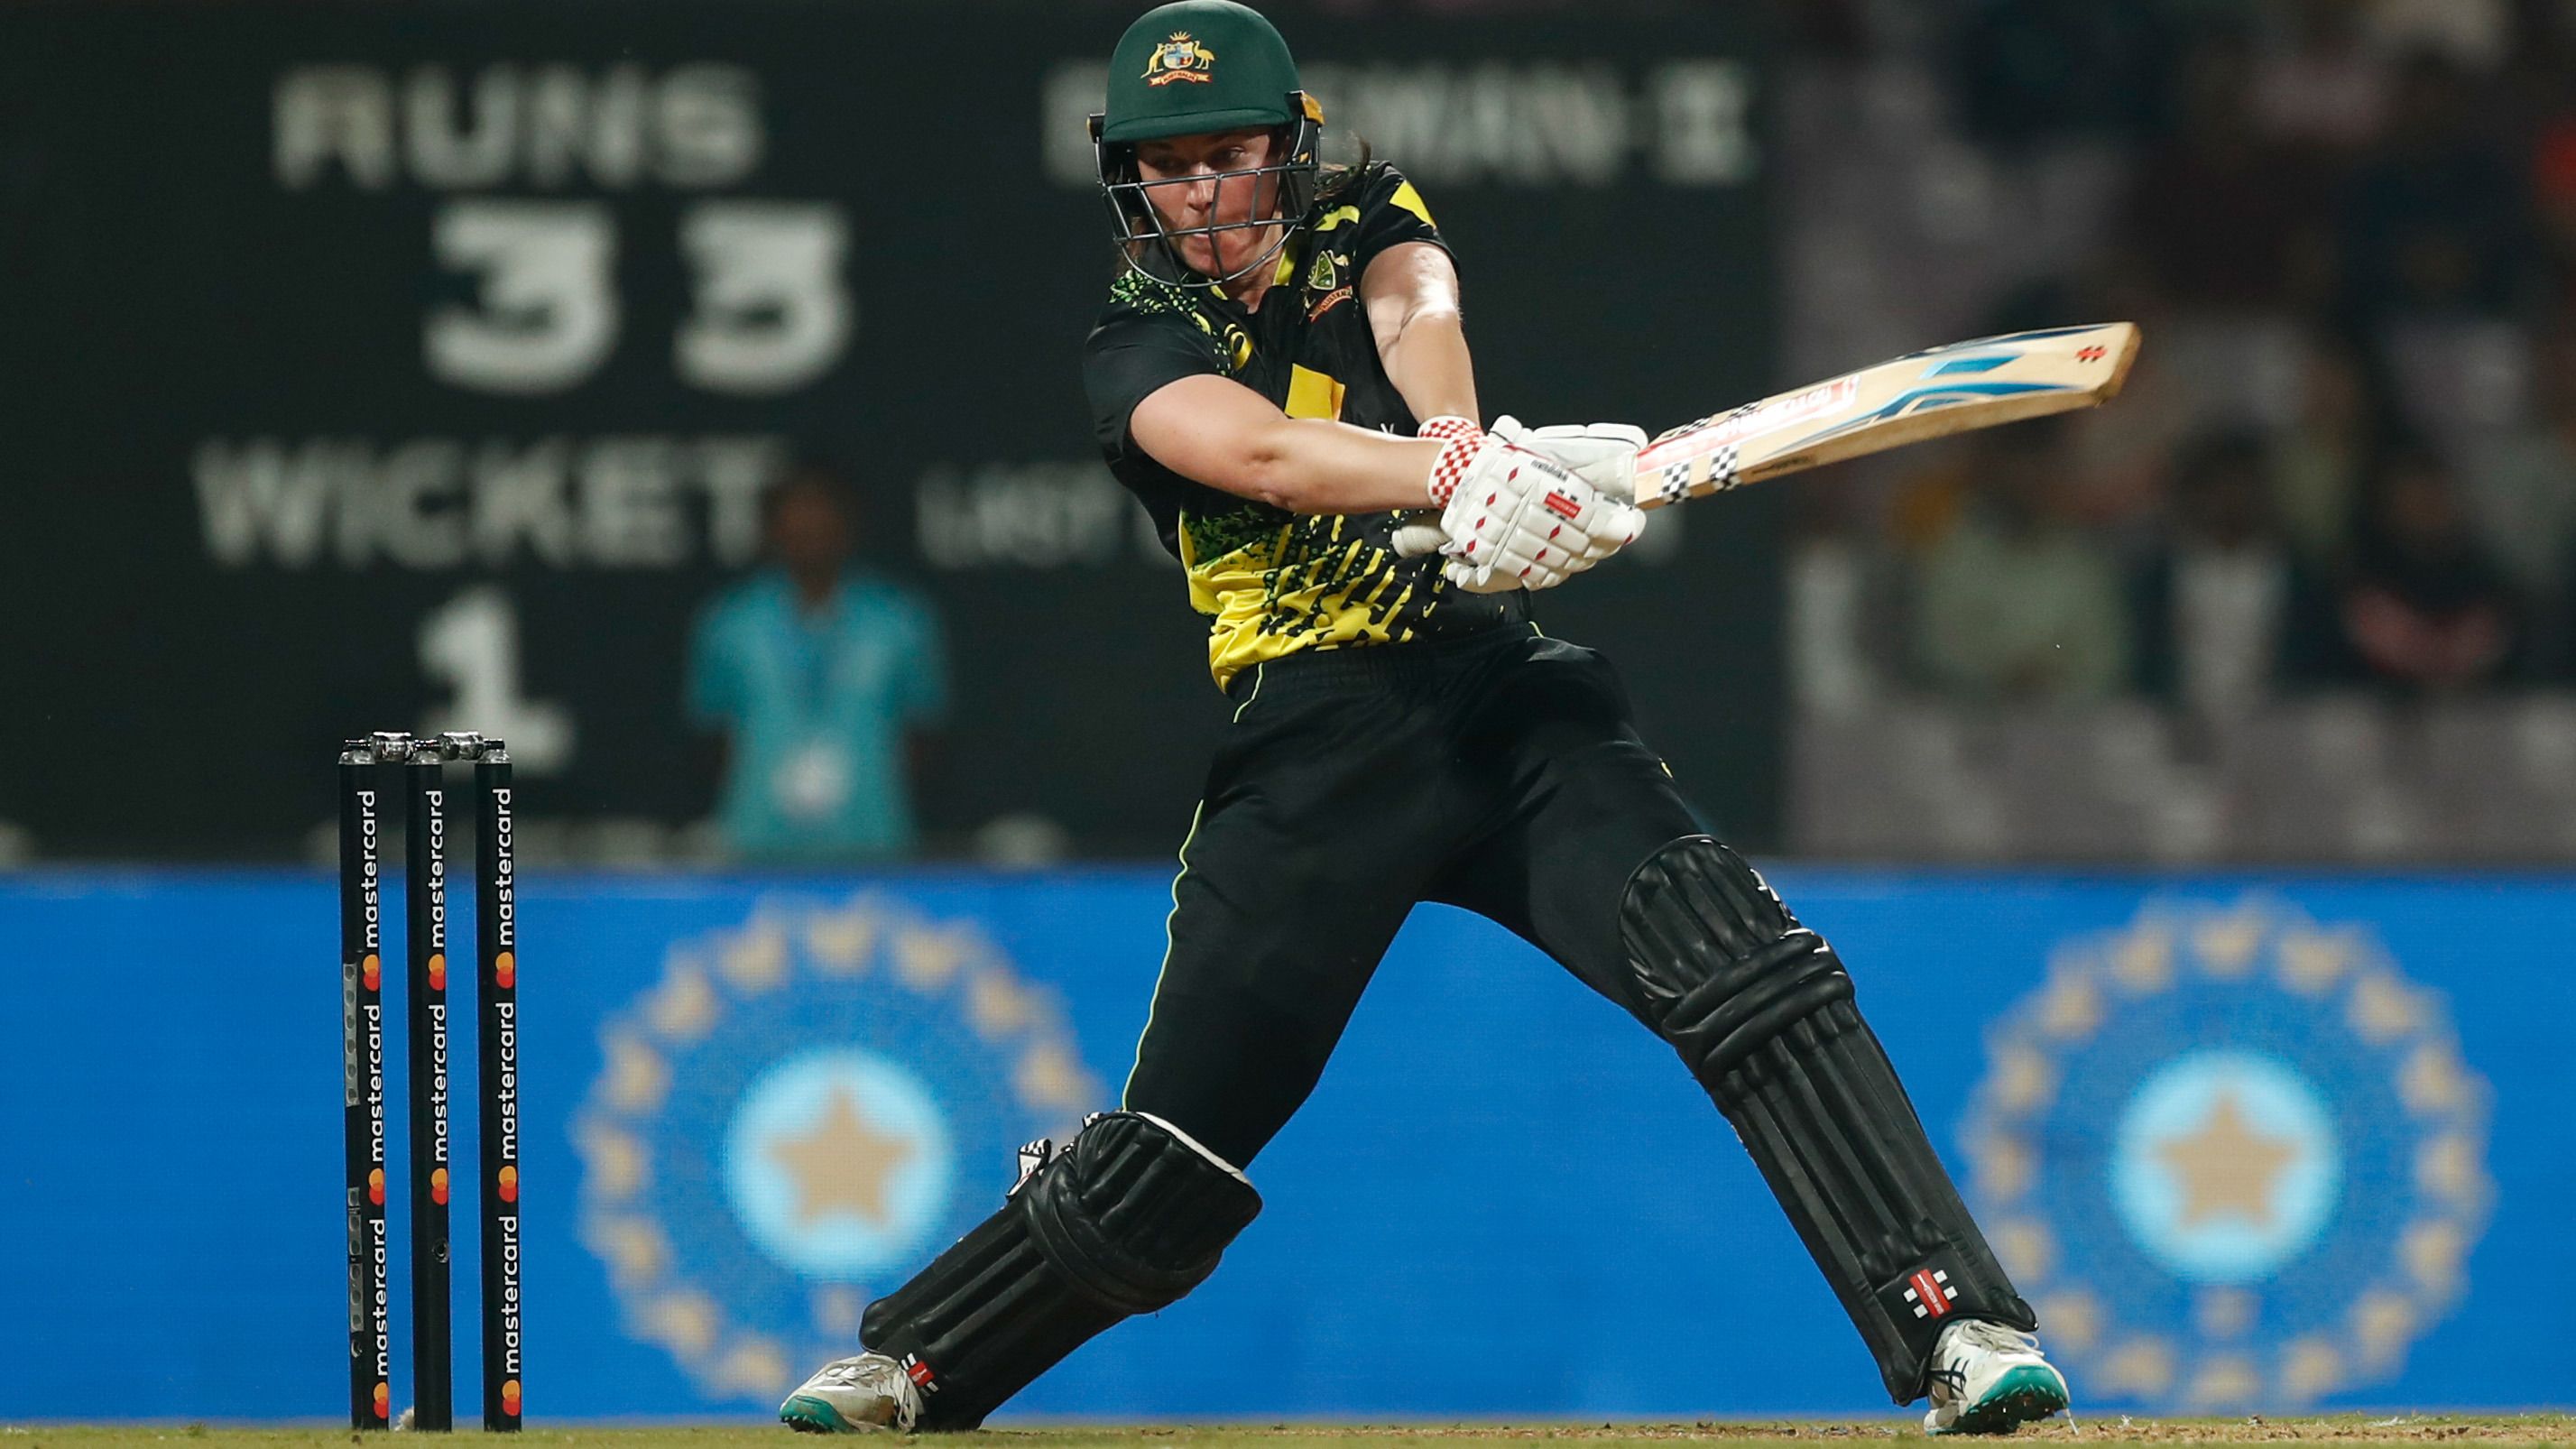 Tahlia McGrath of Australia plays a shot during the T20 International series between India and Australia at Dr DY Patil Cricket Stadium on December 11, 2022 in Mumbai, India. (Photo by Pankaj Nangia/Getty Images)